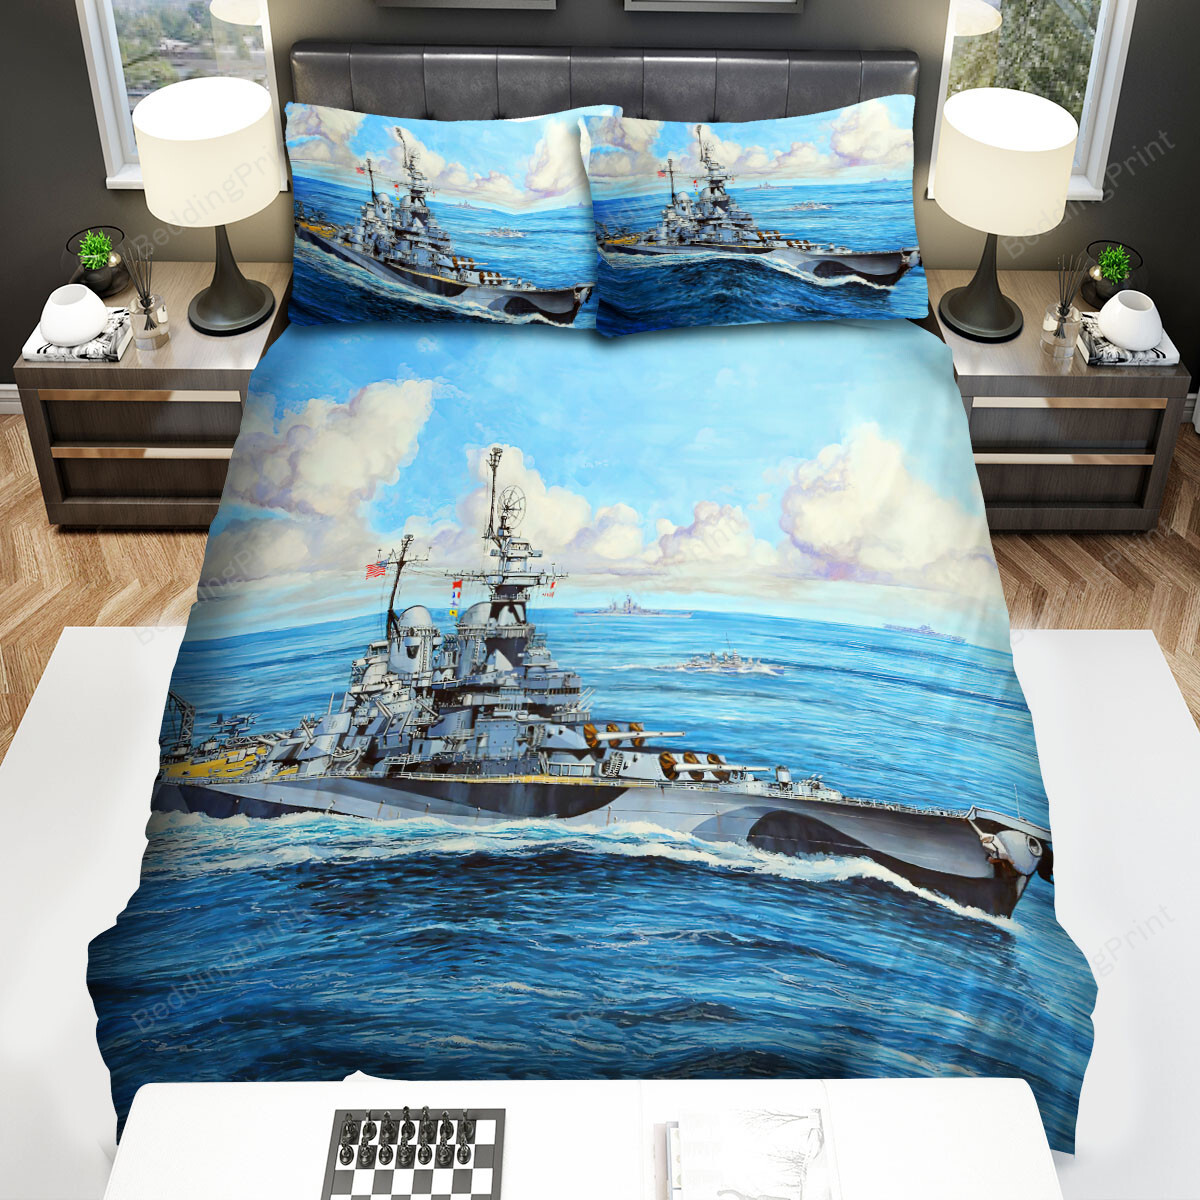 Military Weapon Ww2, Uss Georgia The Battleship Bed Sheets Spread Duvet Cover Bedding Sets